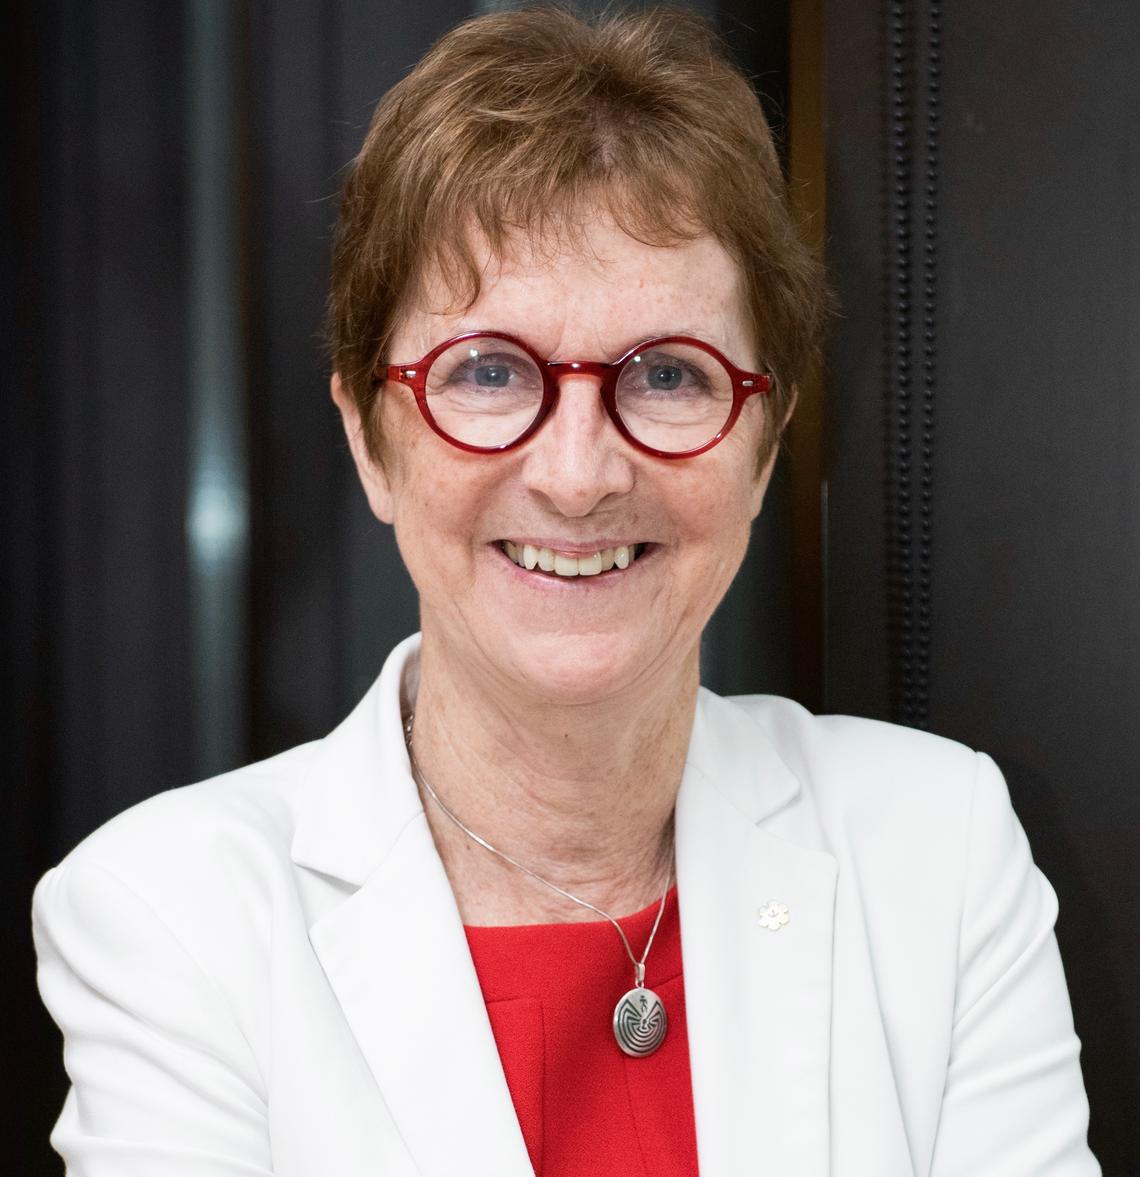 Janet Rossant is the president and scientific director of the Gairdner Foundation, senior scientist in the development and stem cell biology program at The Hospital for Sick Children and chief of research emerita of The Hospital for Sick Children.